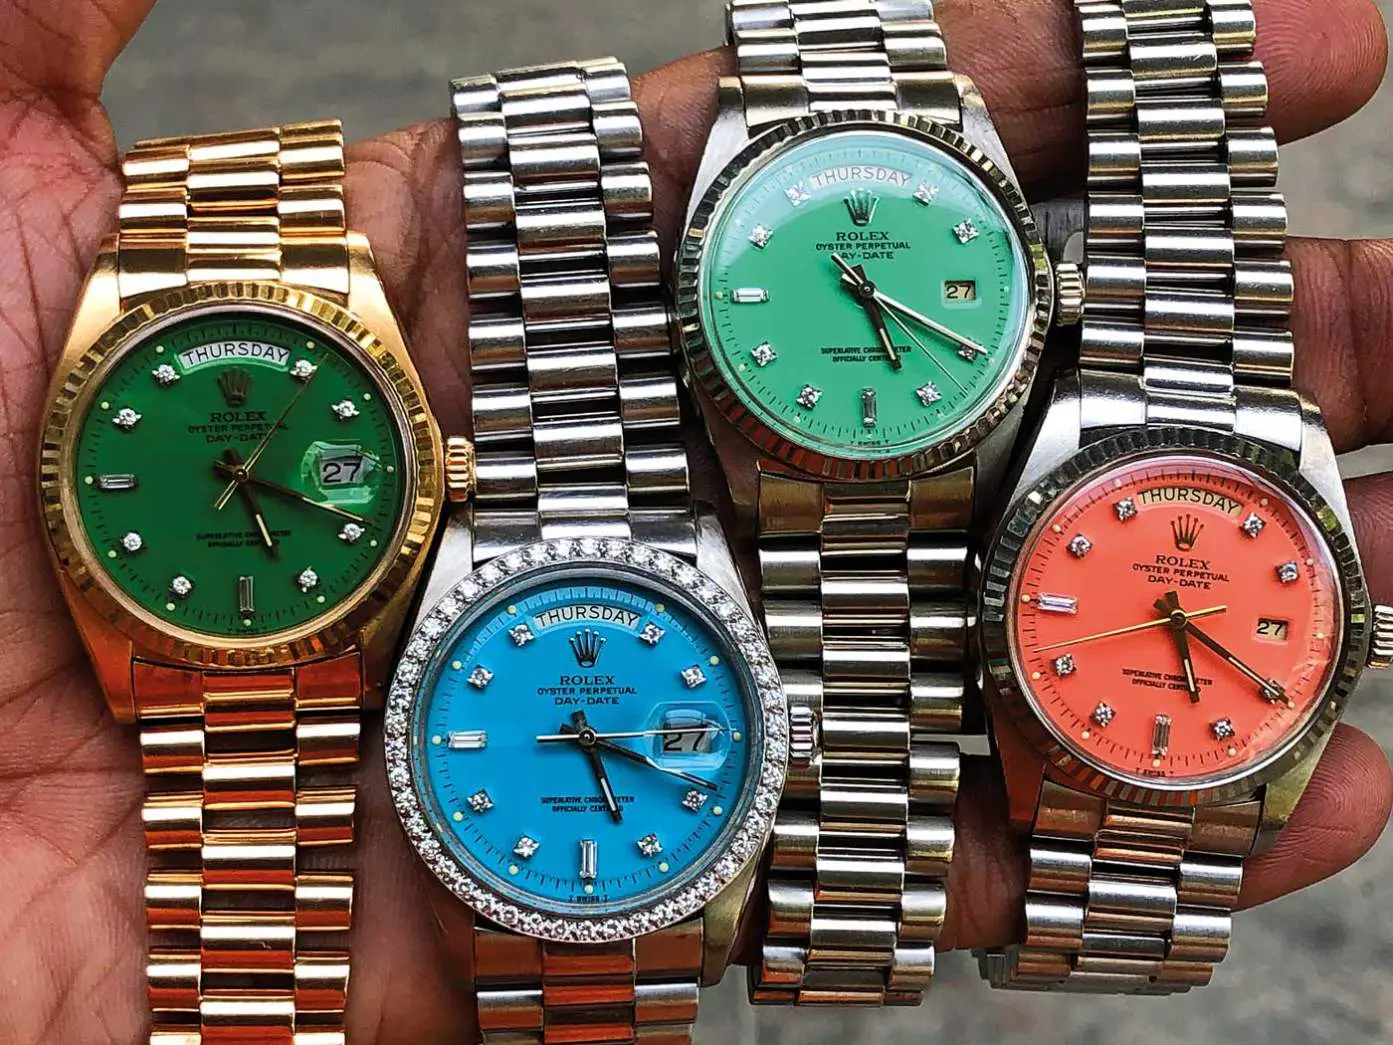 RECOMMENDED WATCHING: 3 reasons why watches are so horribly expensive -  Time and Tide Watches